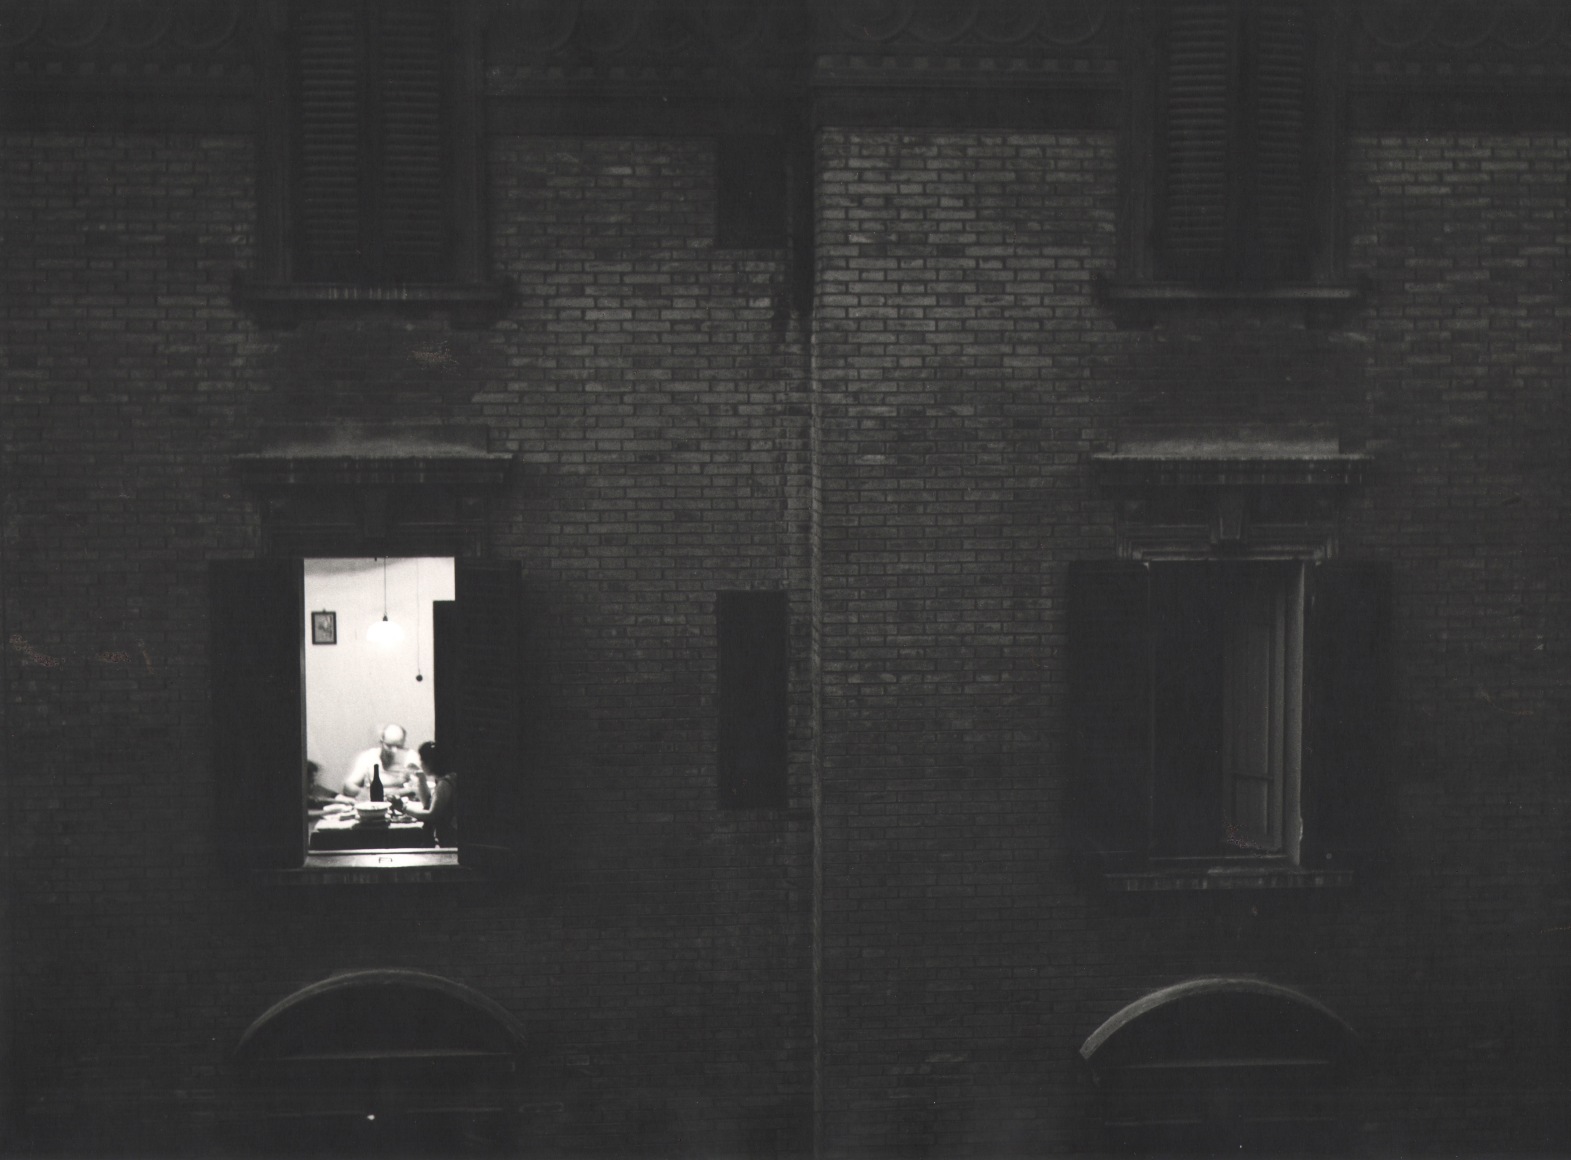 Nino Migliori, Summer evening from 'People of Emilia,' 1953. Exterior view of an apartment building. One window is lit and a family is seated at the dinner table.